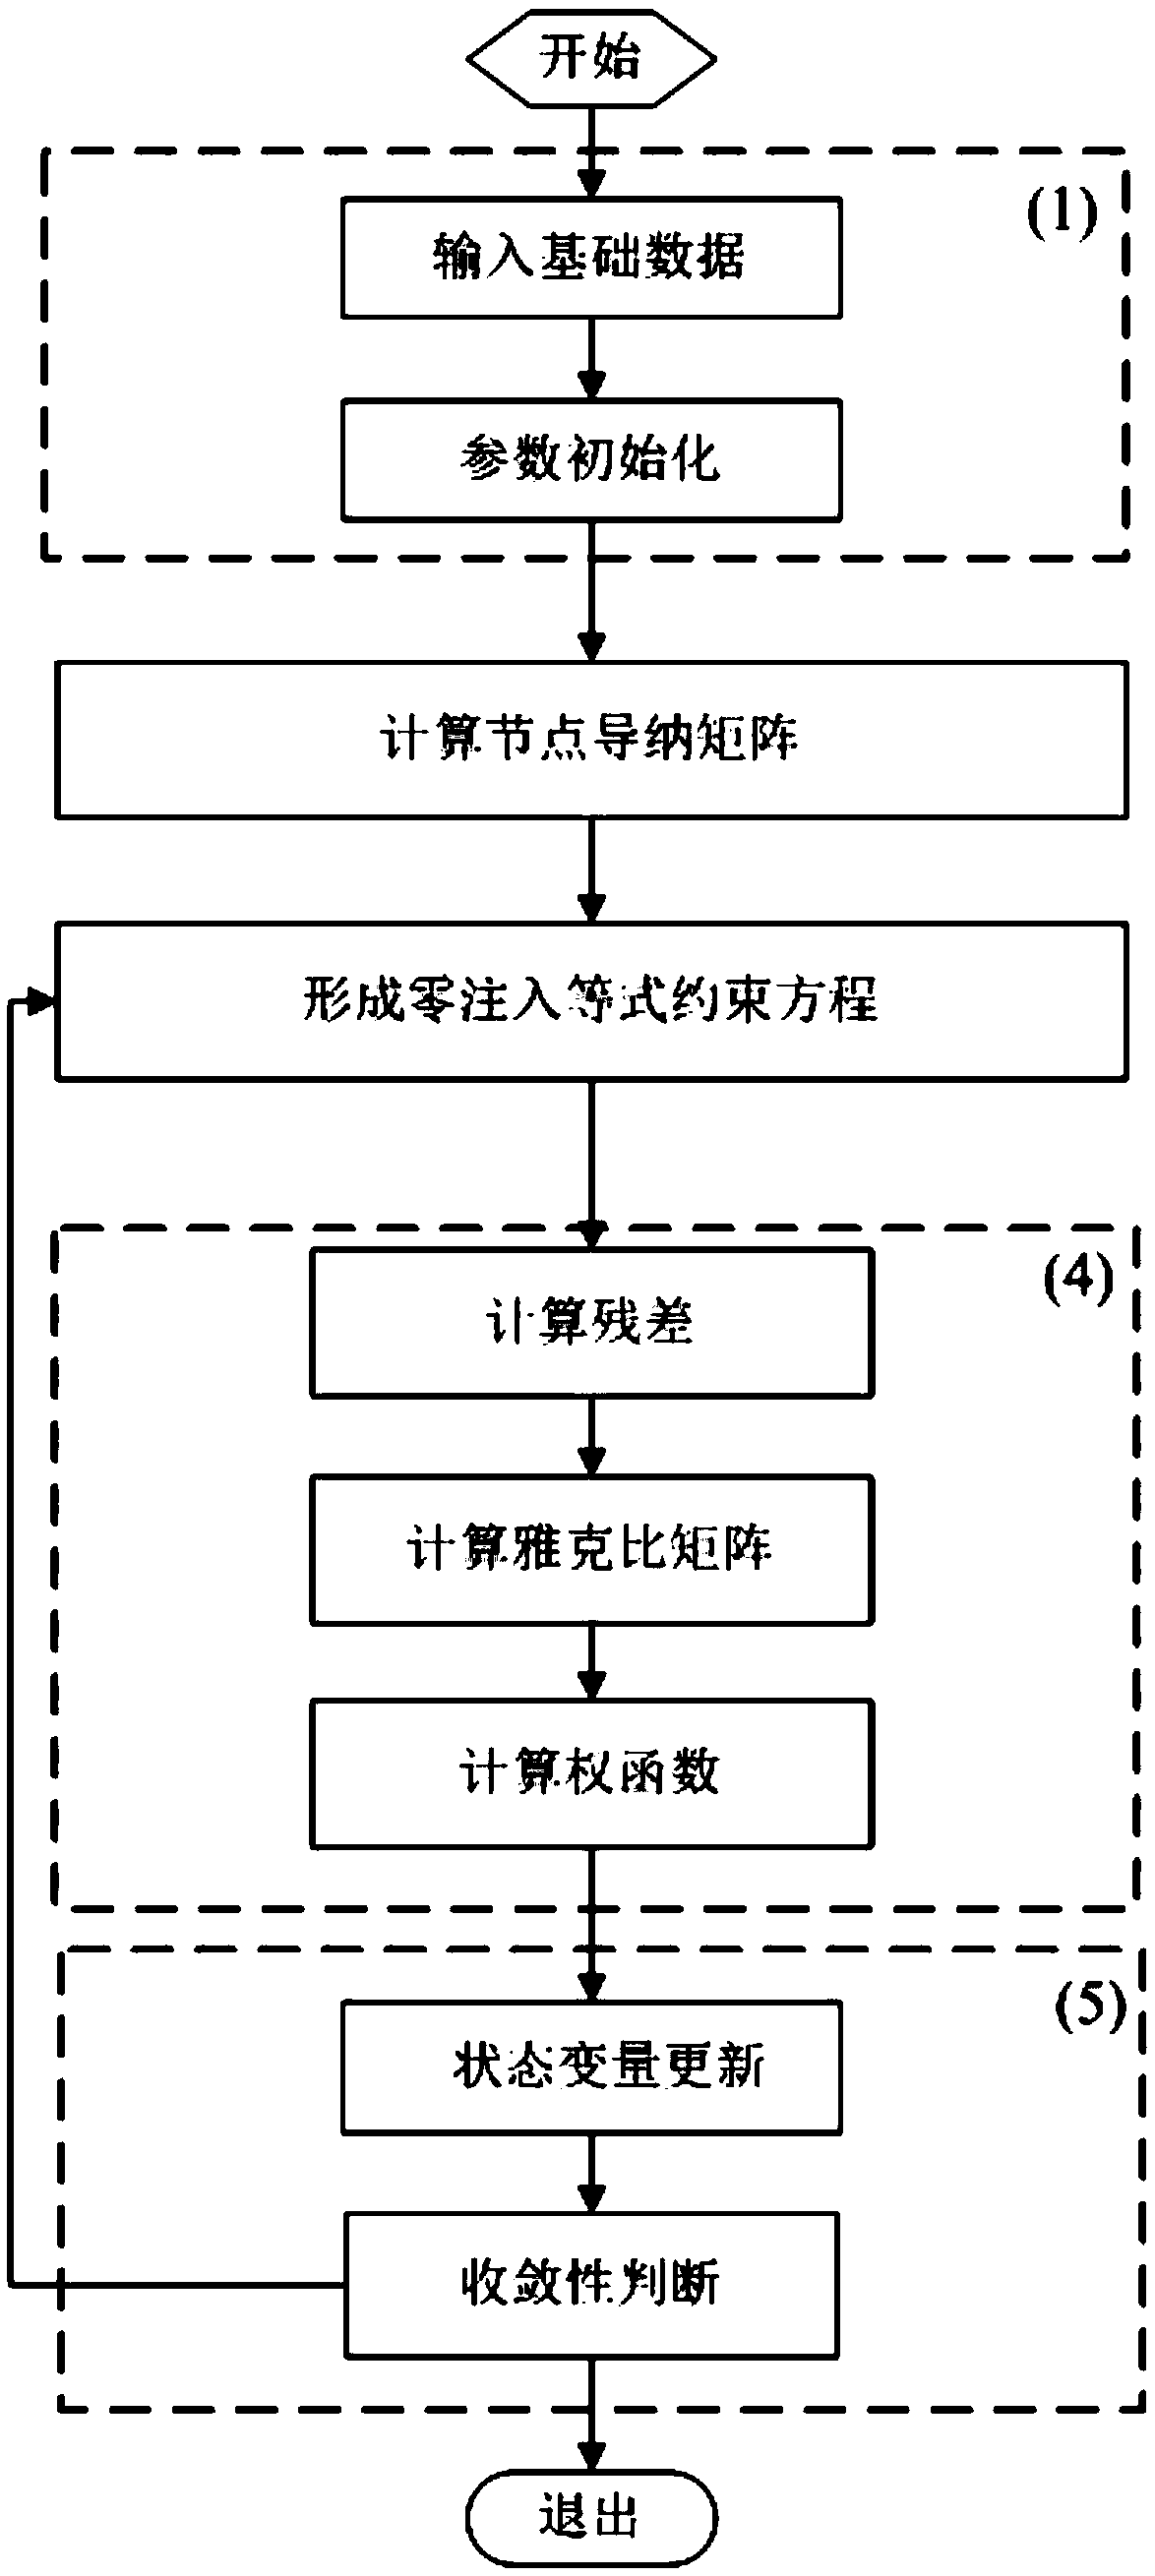 Weight function least square state estimation method based on residual normalization